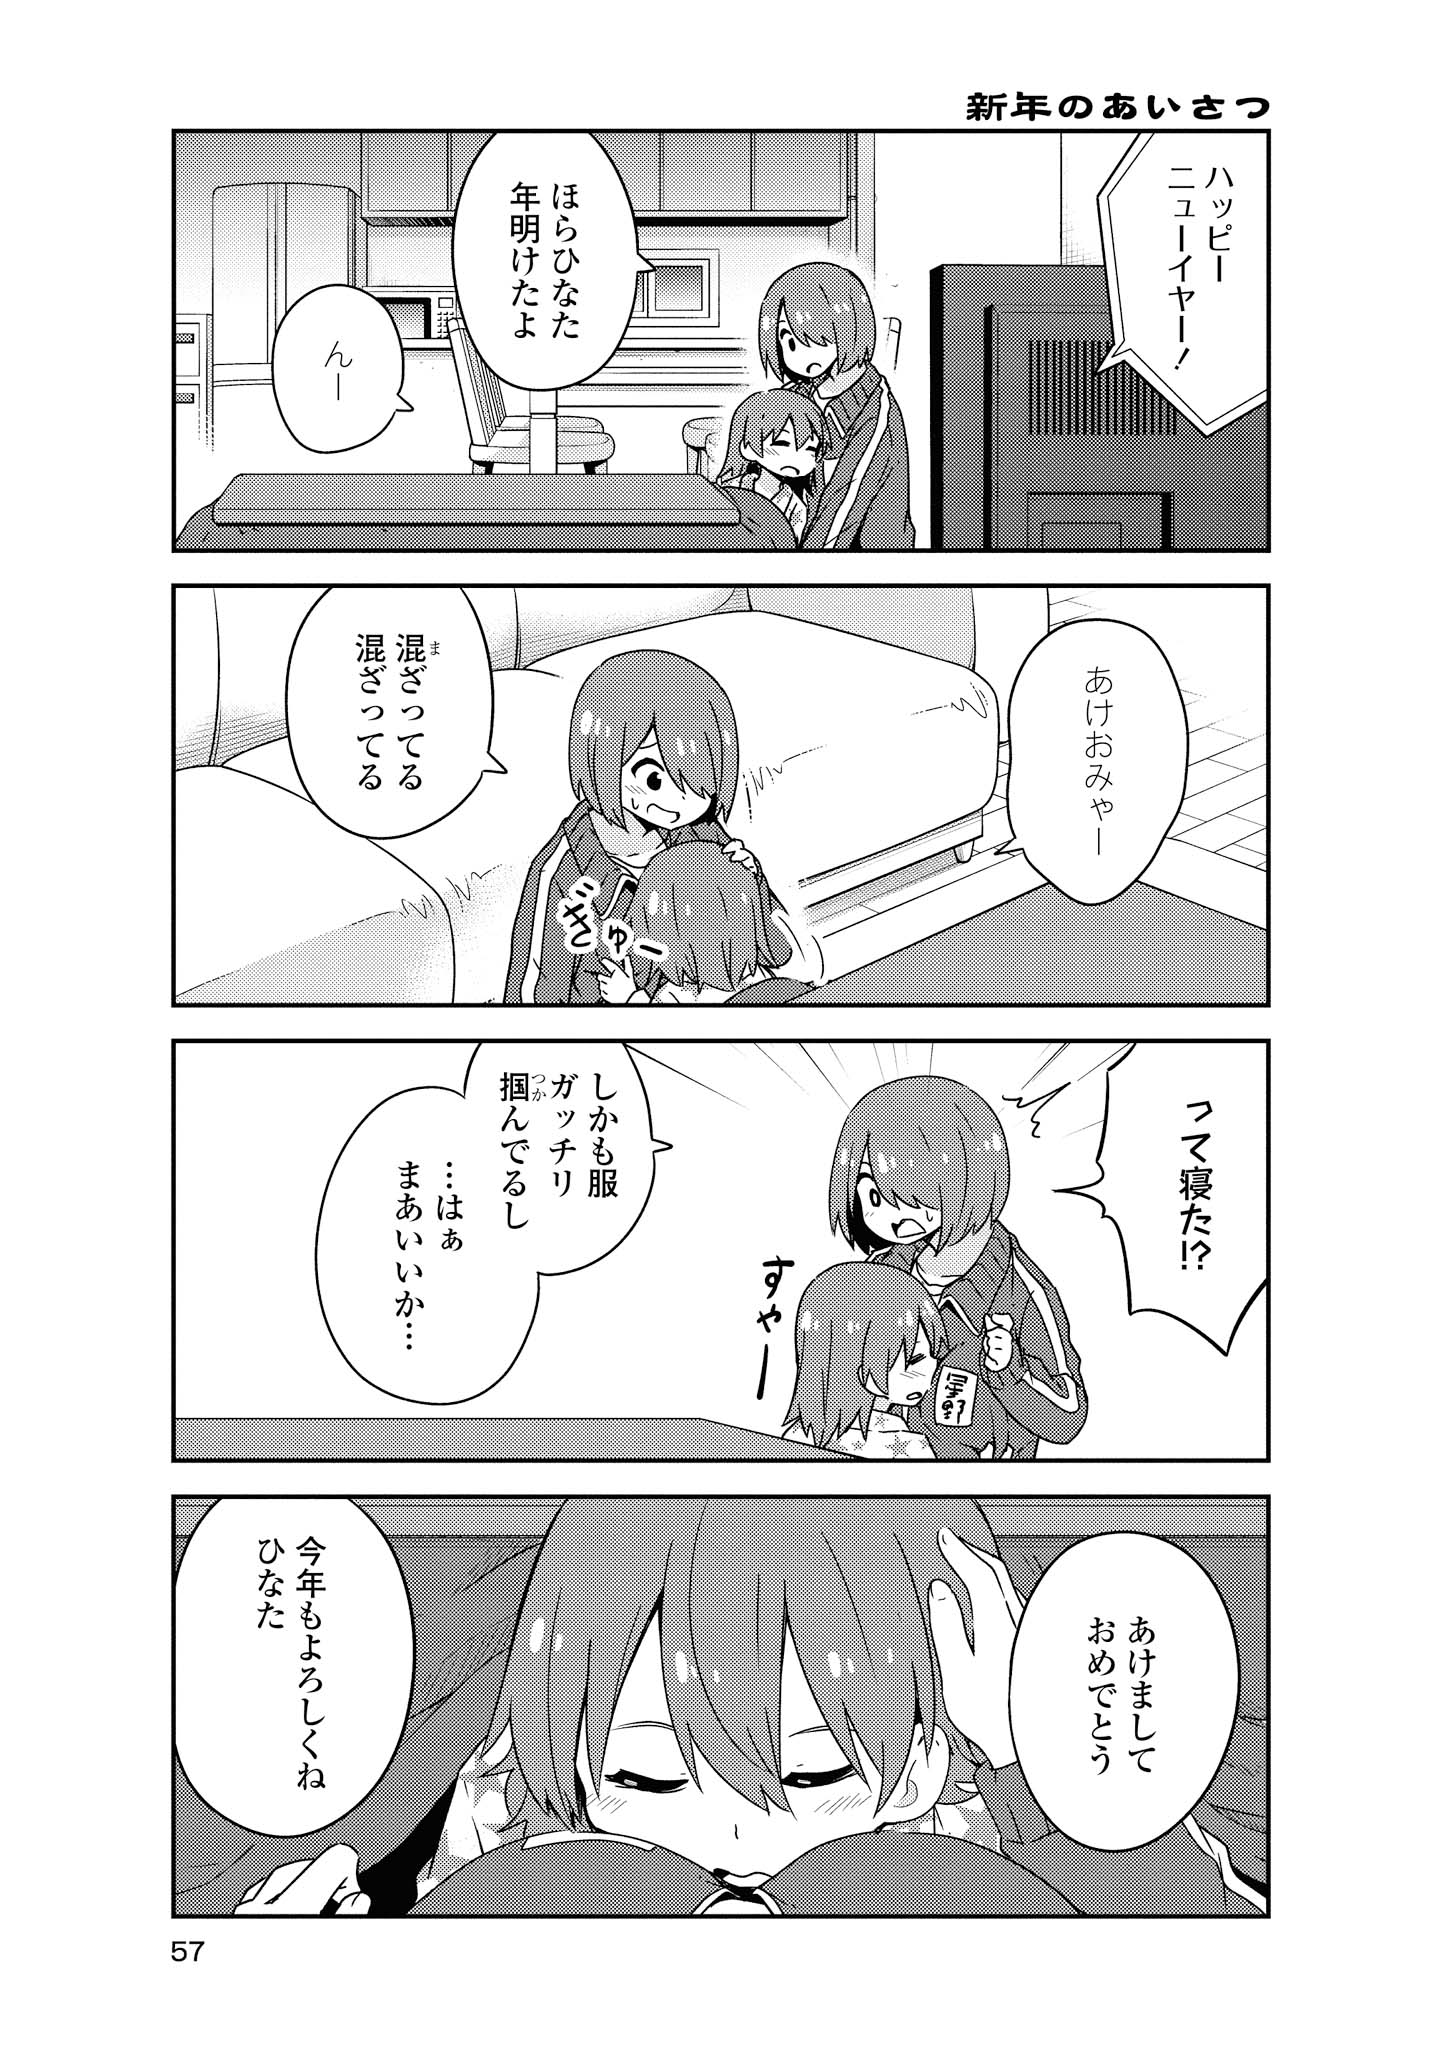 Wataten! An Angel Flew Down to Me 私に天使が舞い降りた！ 第46話 - Page 15